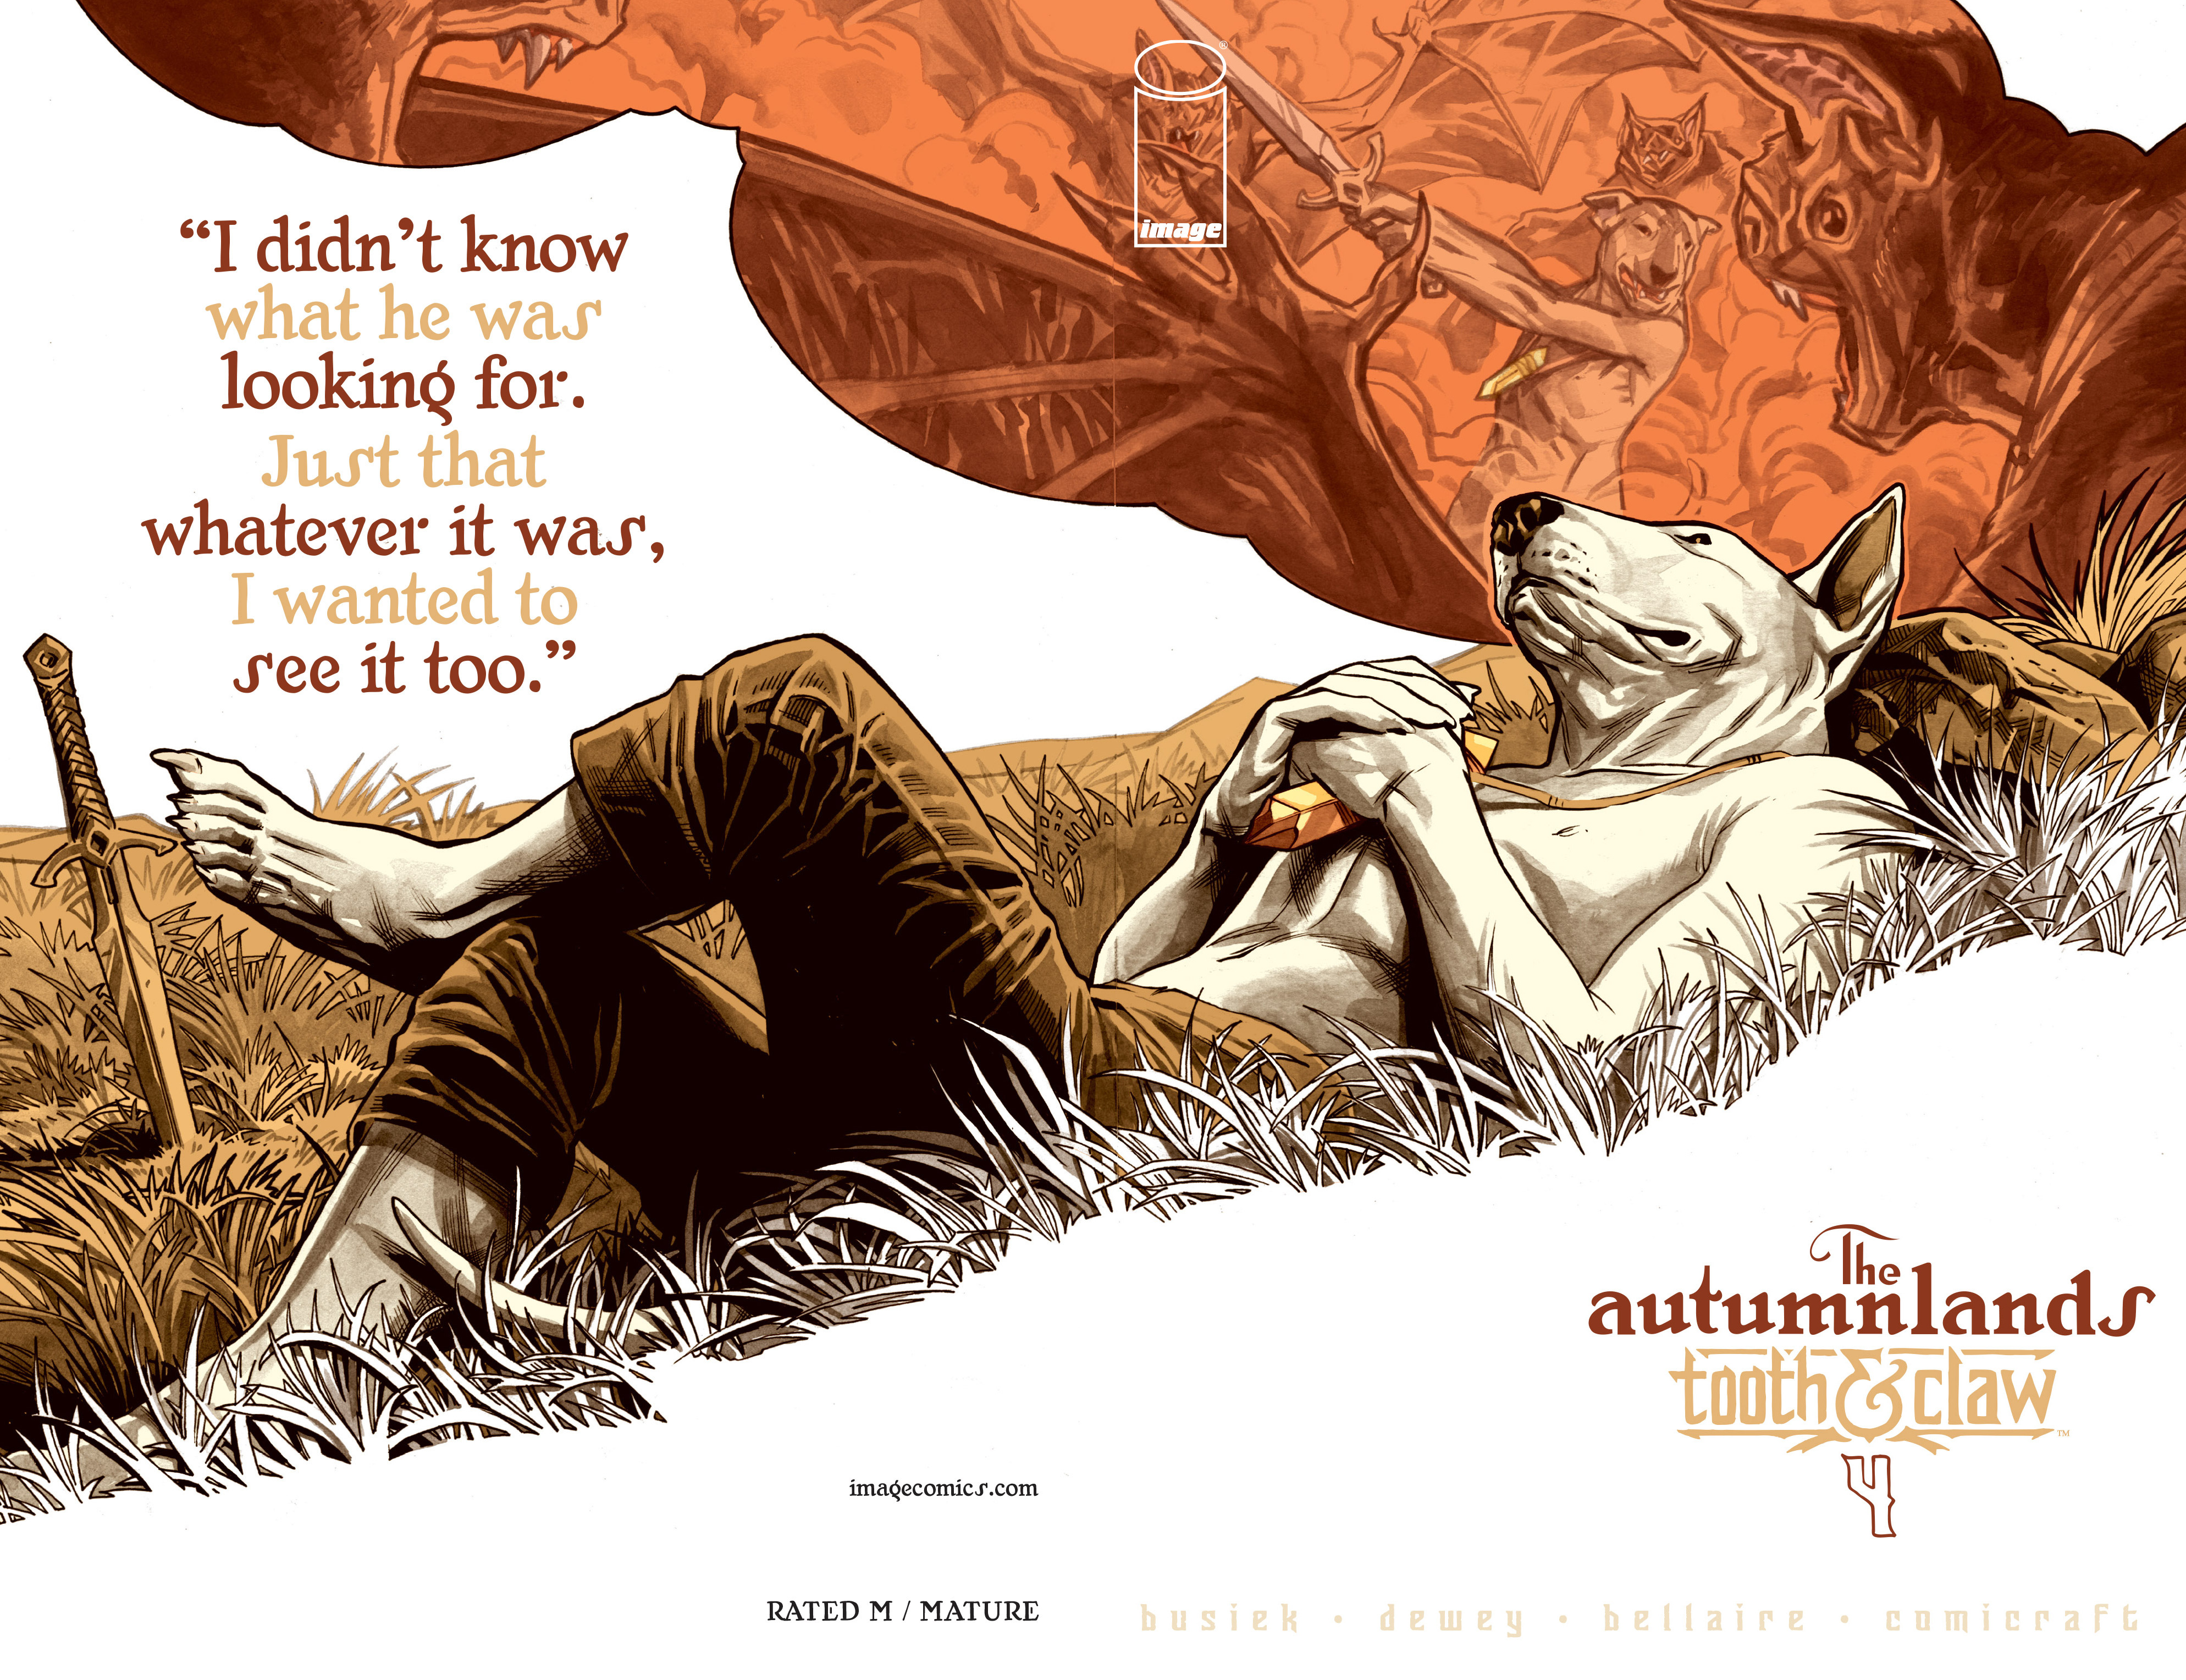 Read online The Autumnlands: Tooth & Claw comic -  Issue #4 - 1